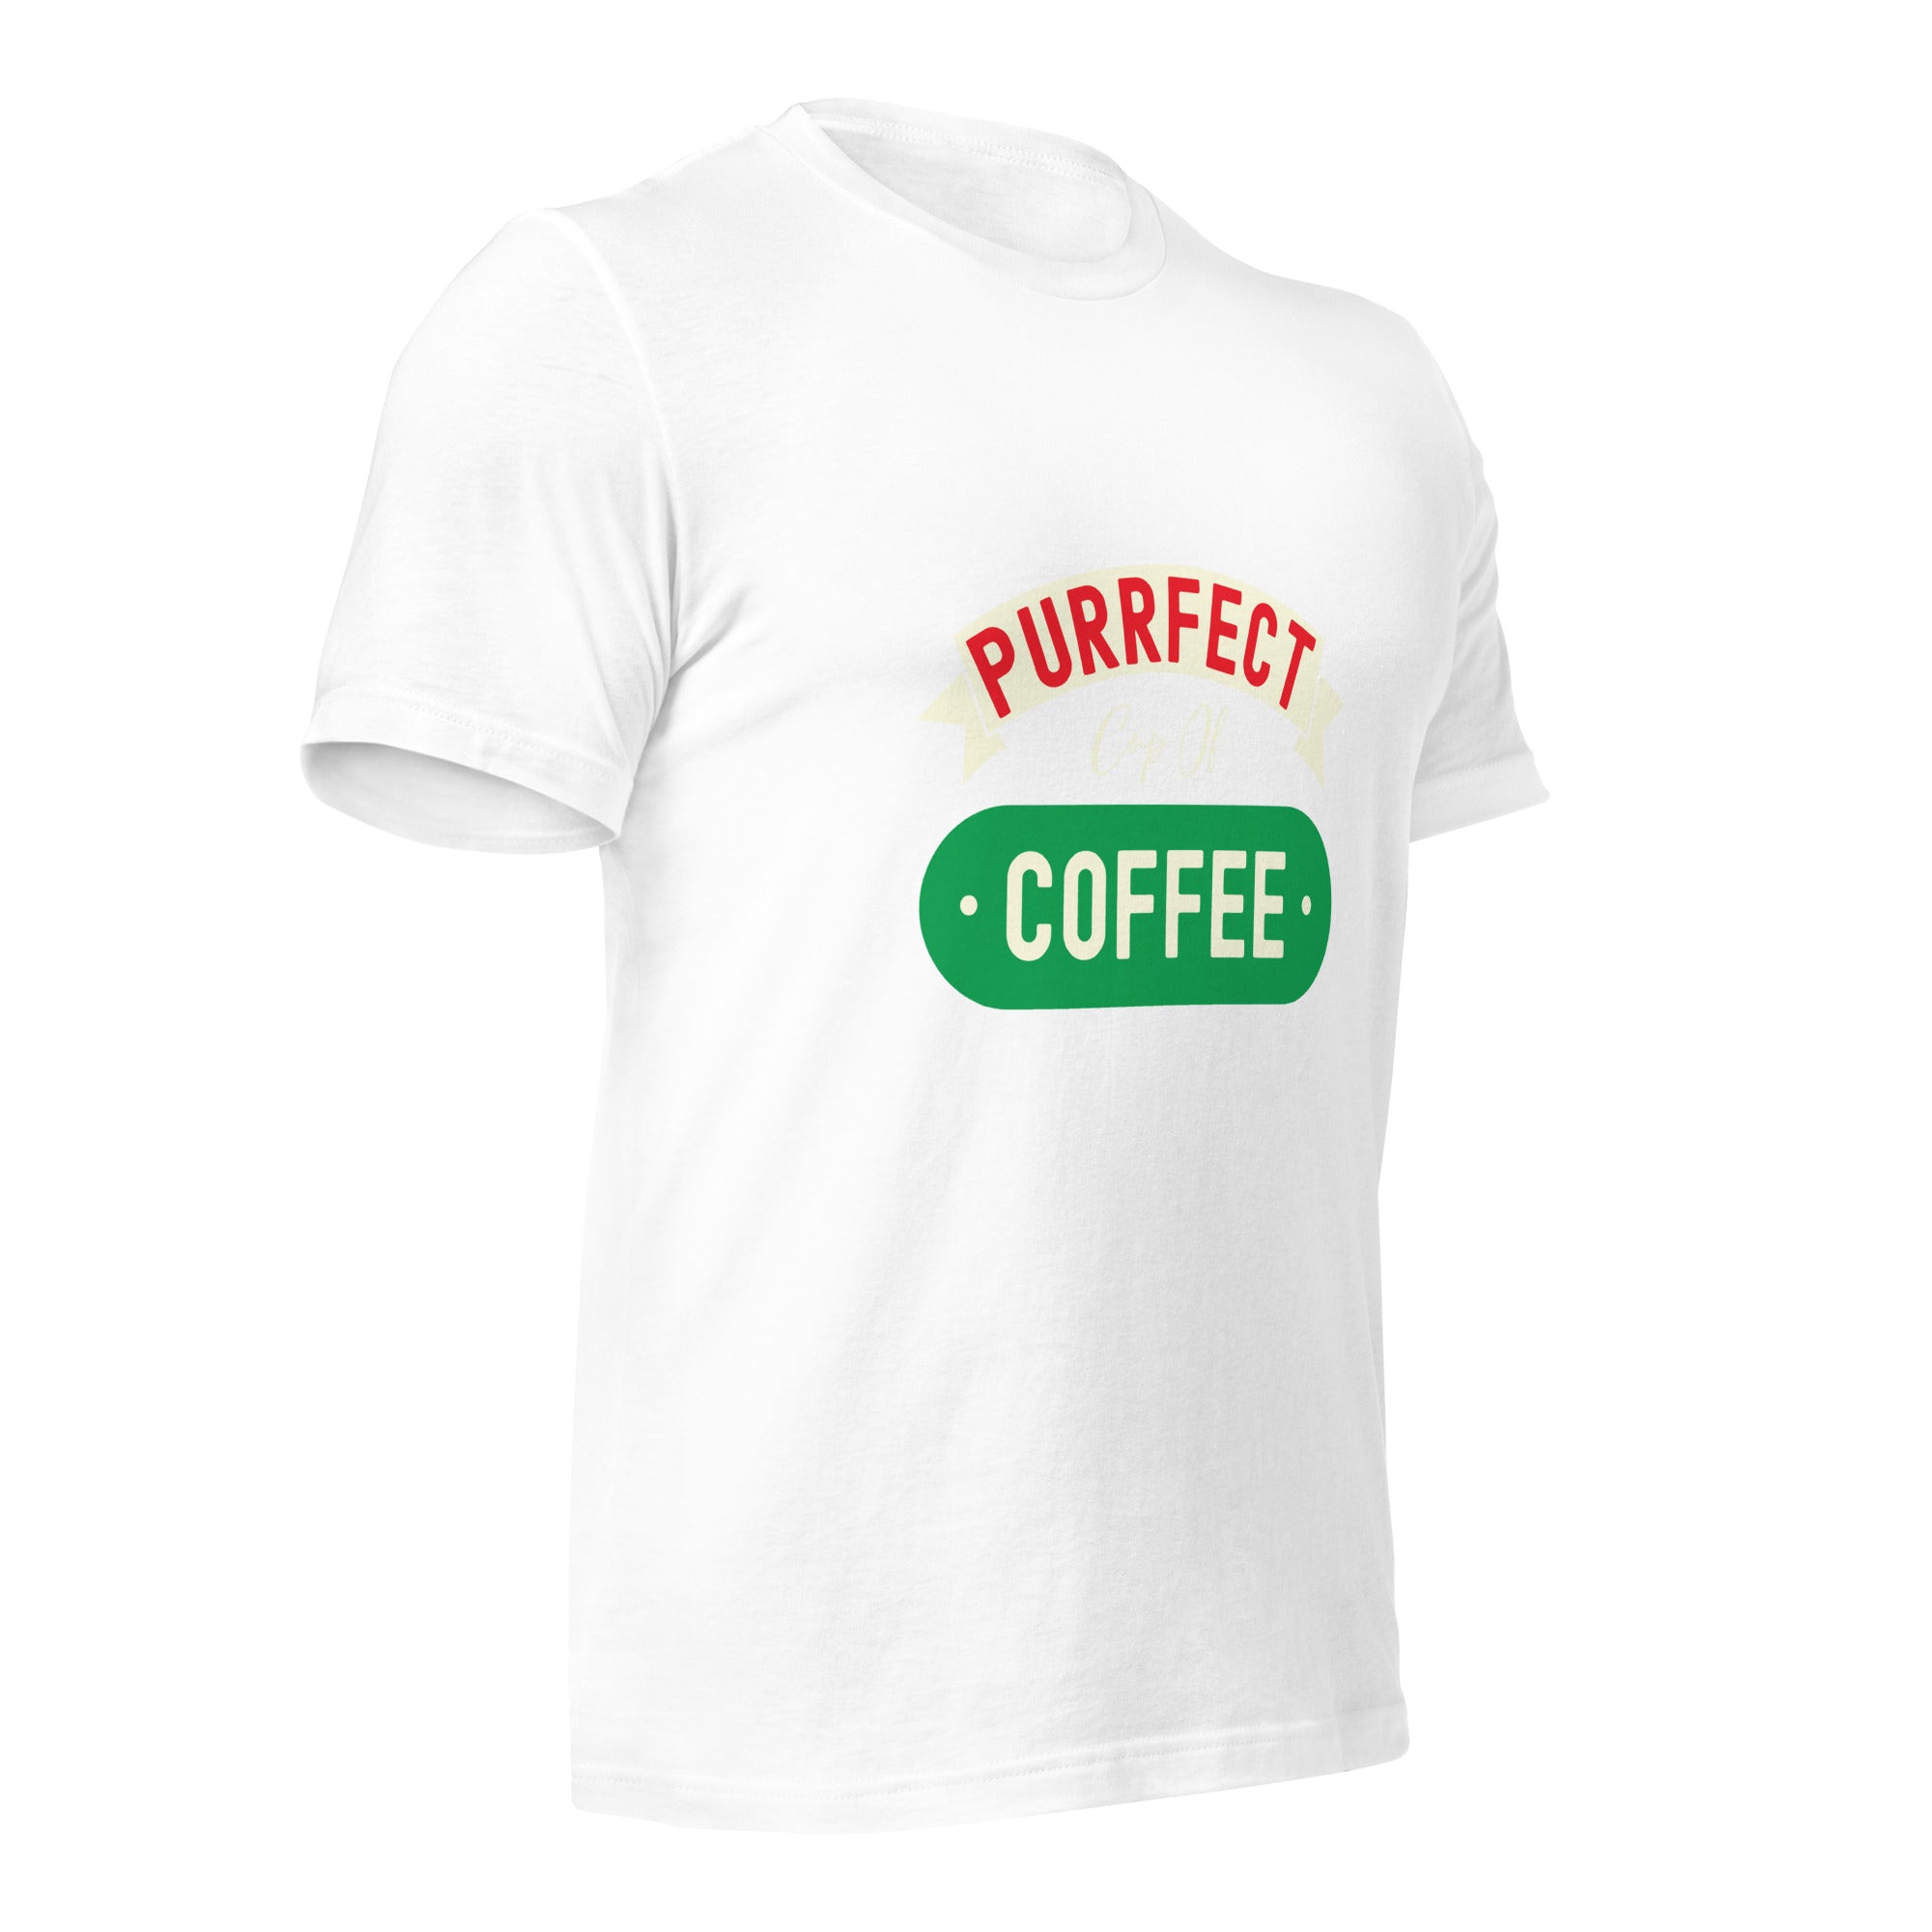 Unisex t-shirt | Purrfect cup of coffee